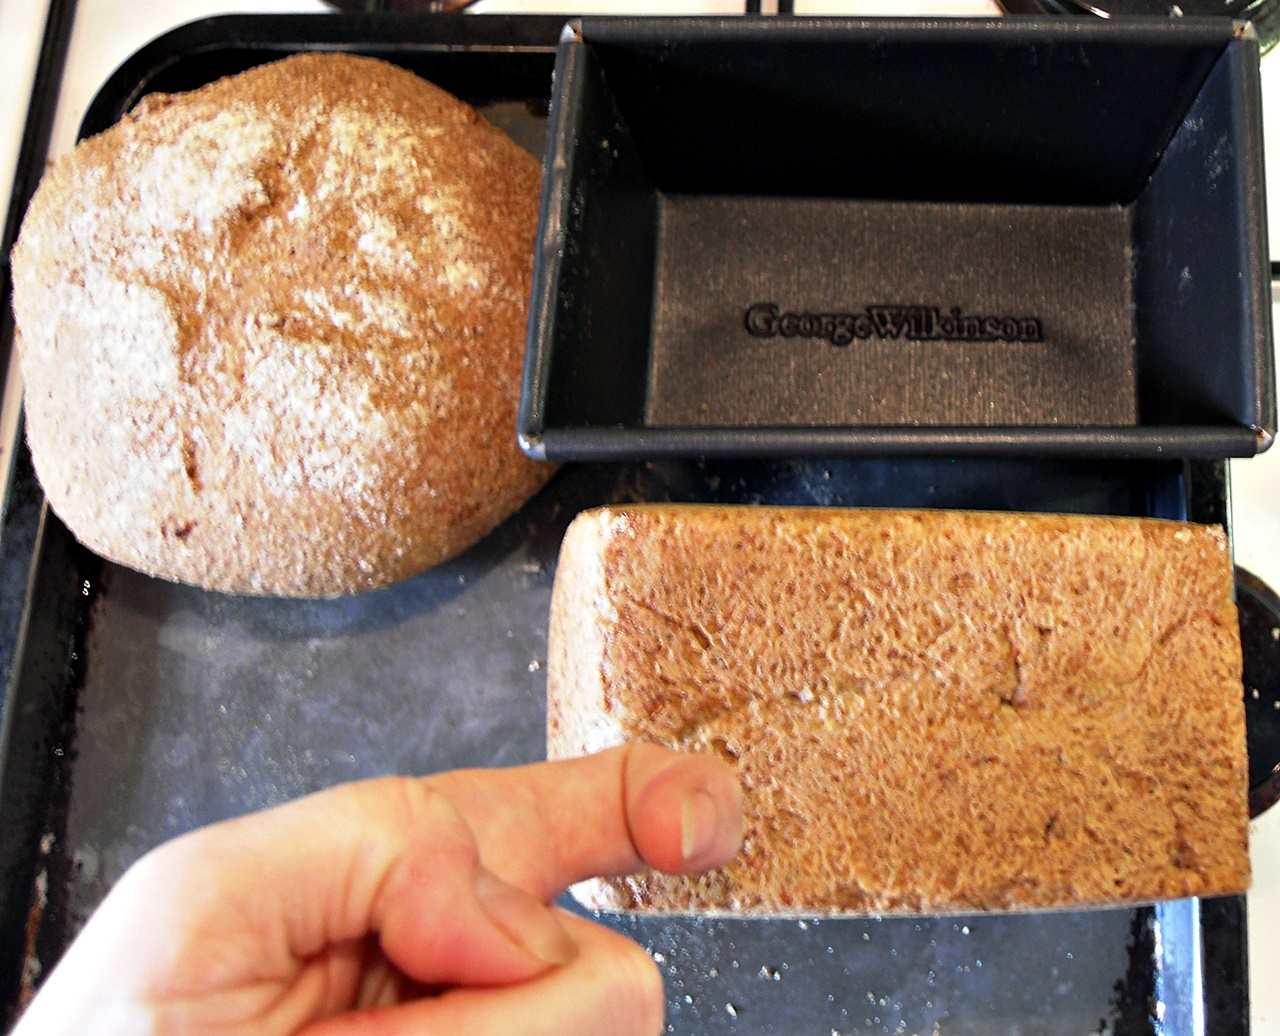 Walnutty Wholemeal Bread being knocked underneath with back of finger.